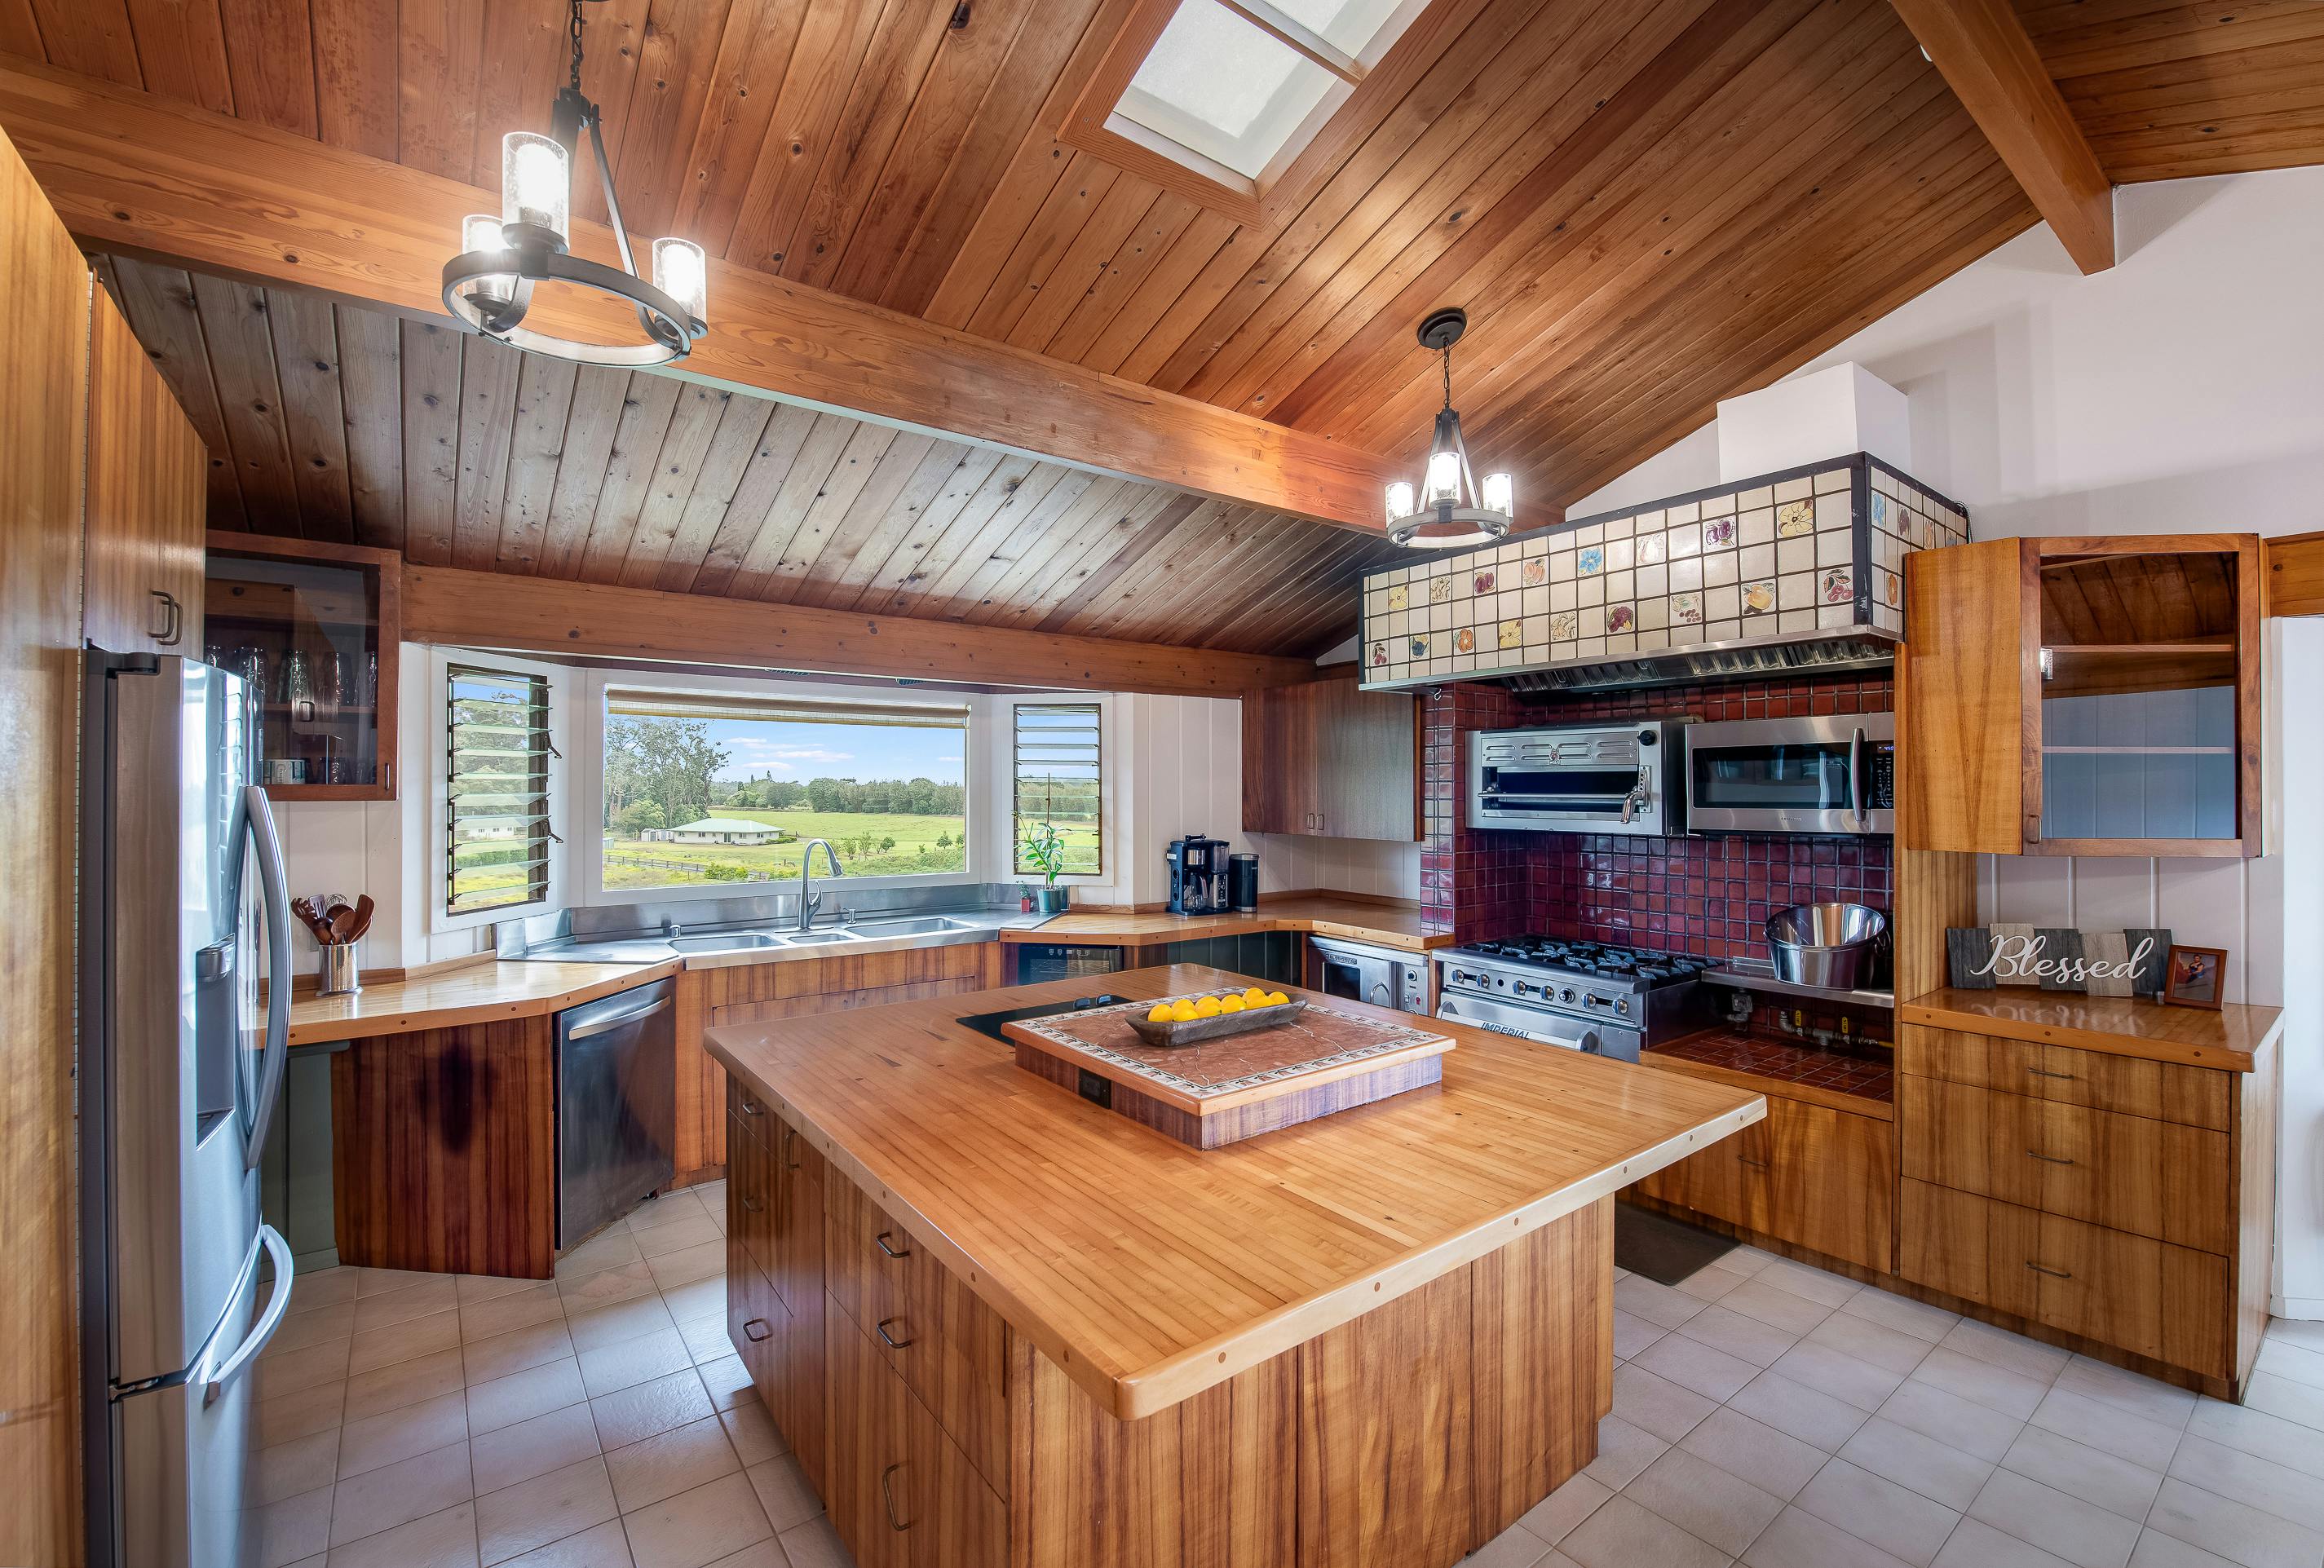 Kitchen at LT Ranchʻs North House